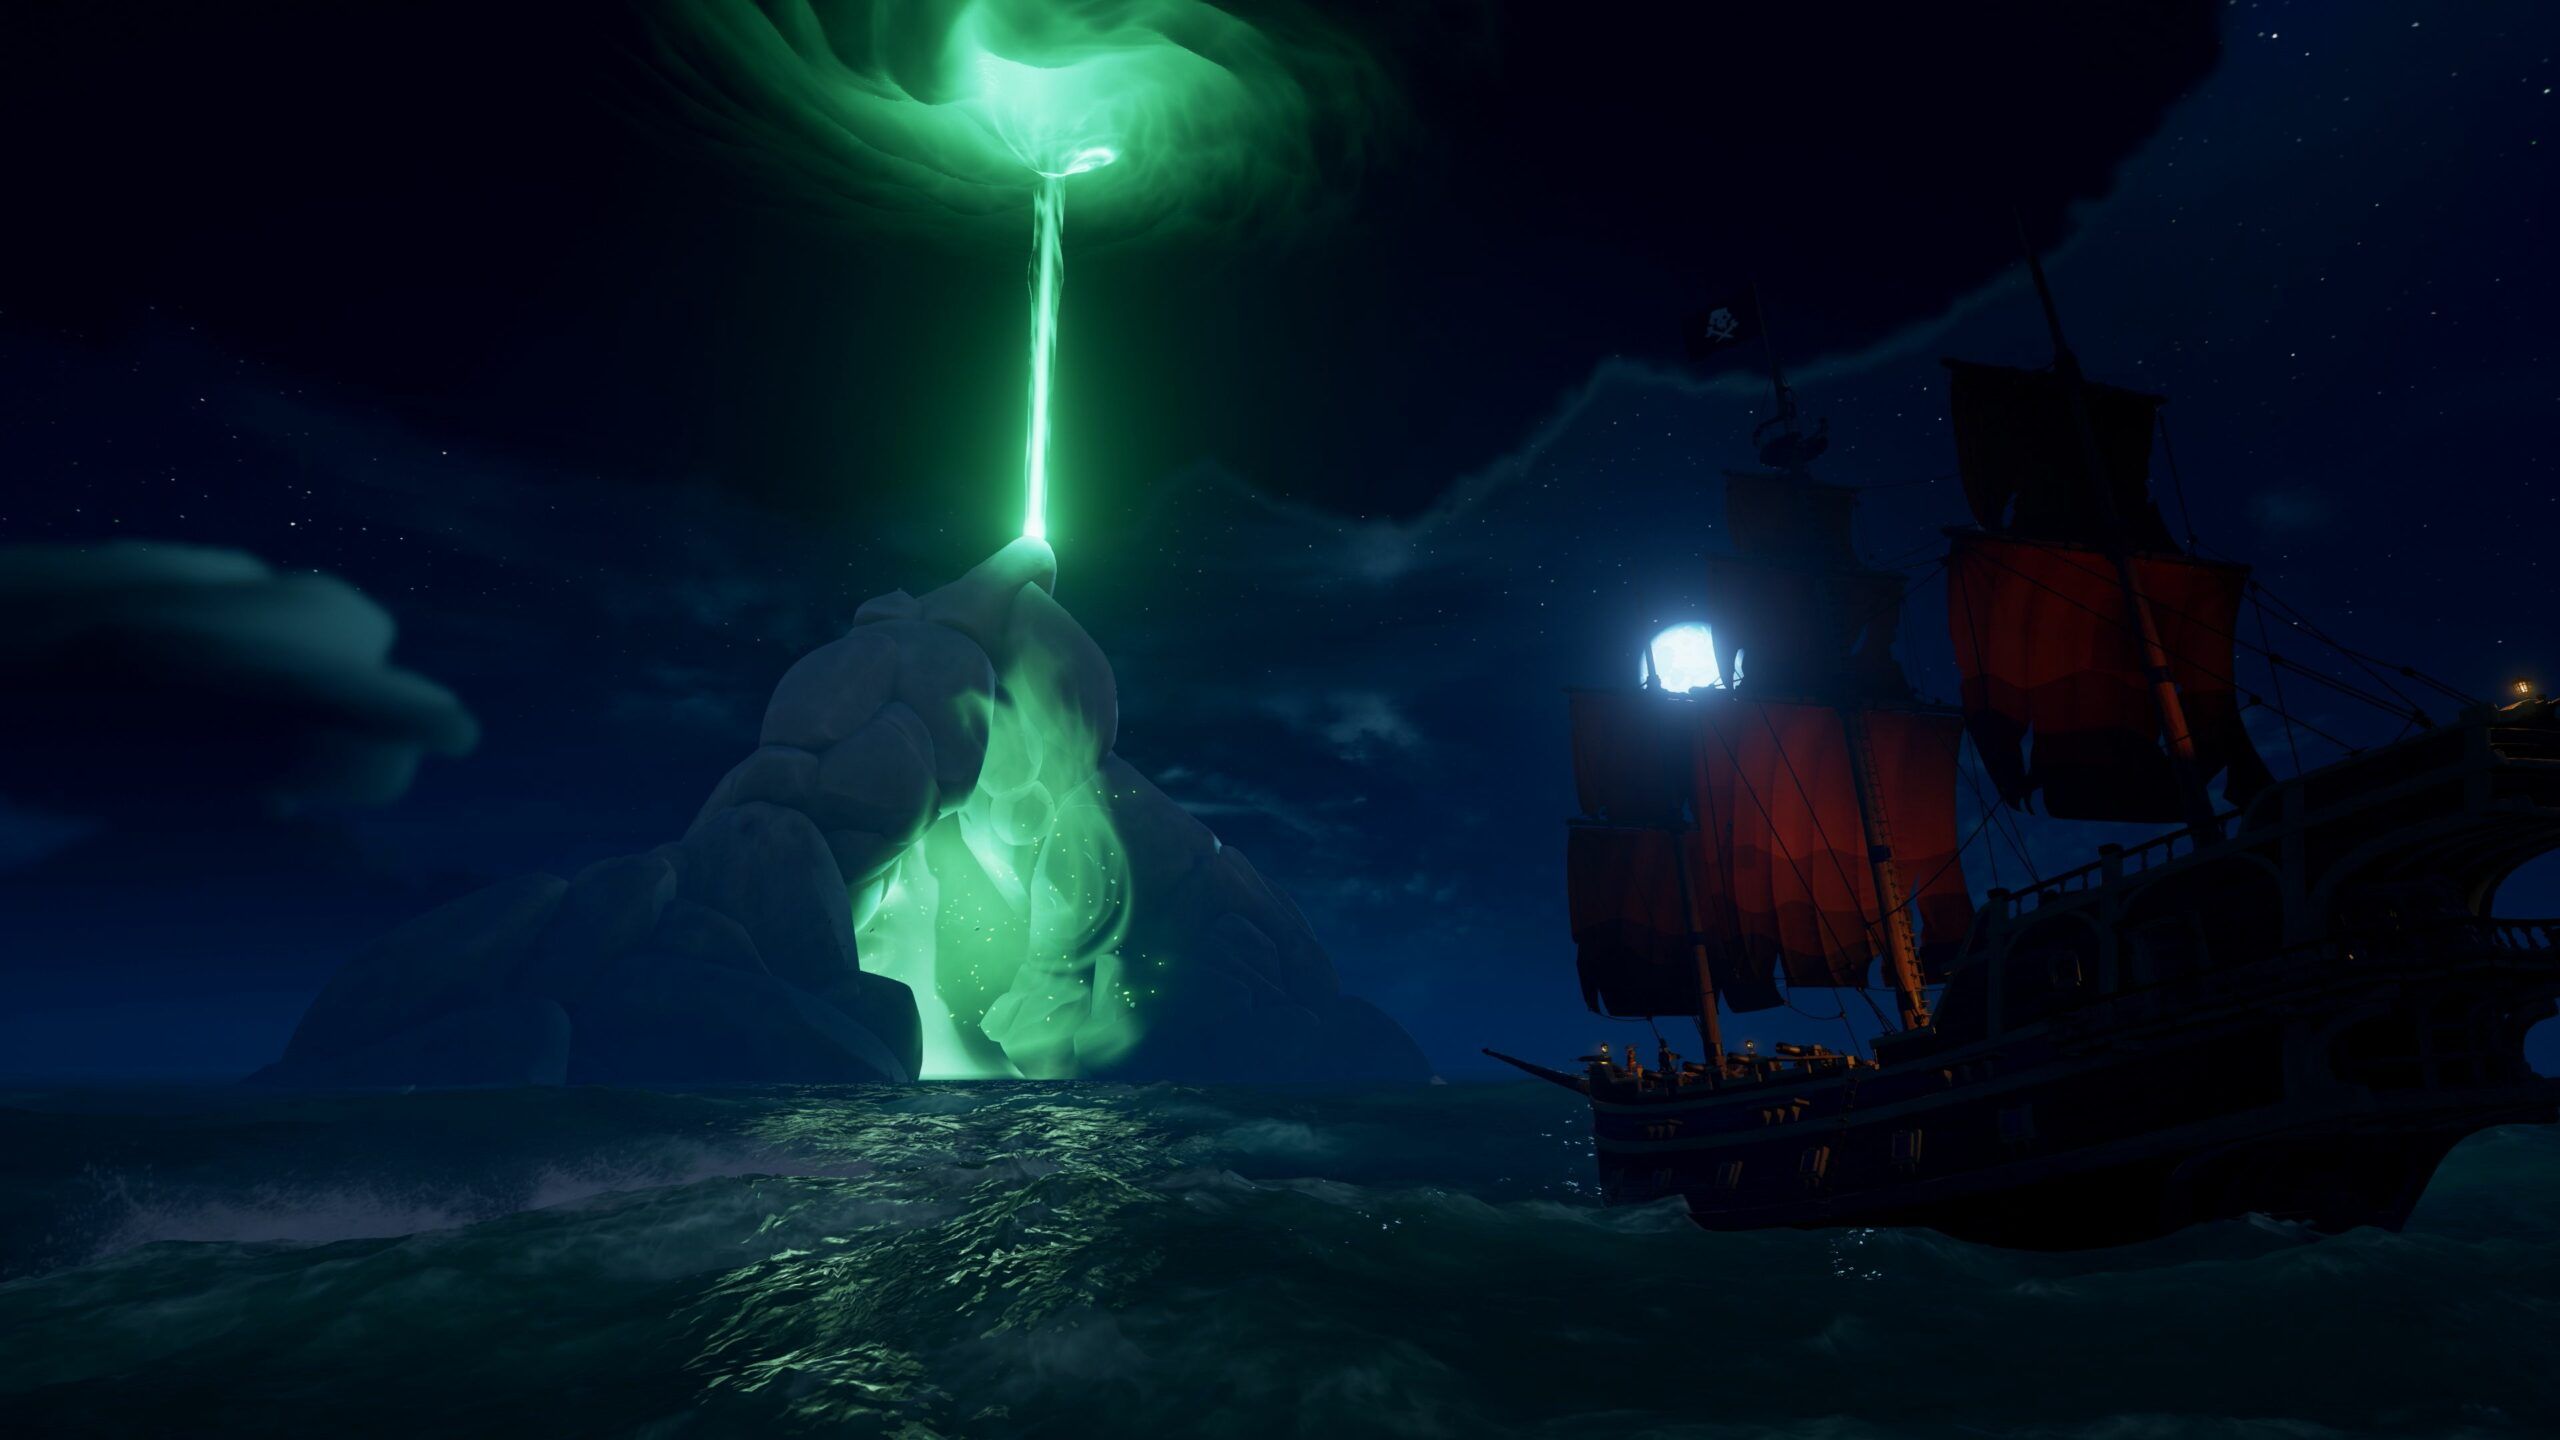 Sea-Of-Thieves-Update-Today-July-13-Patch-Notes-2.2.0.3